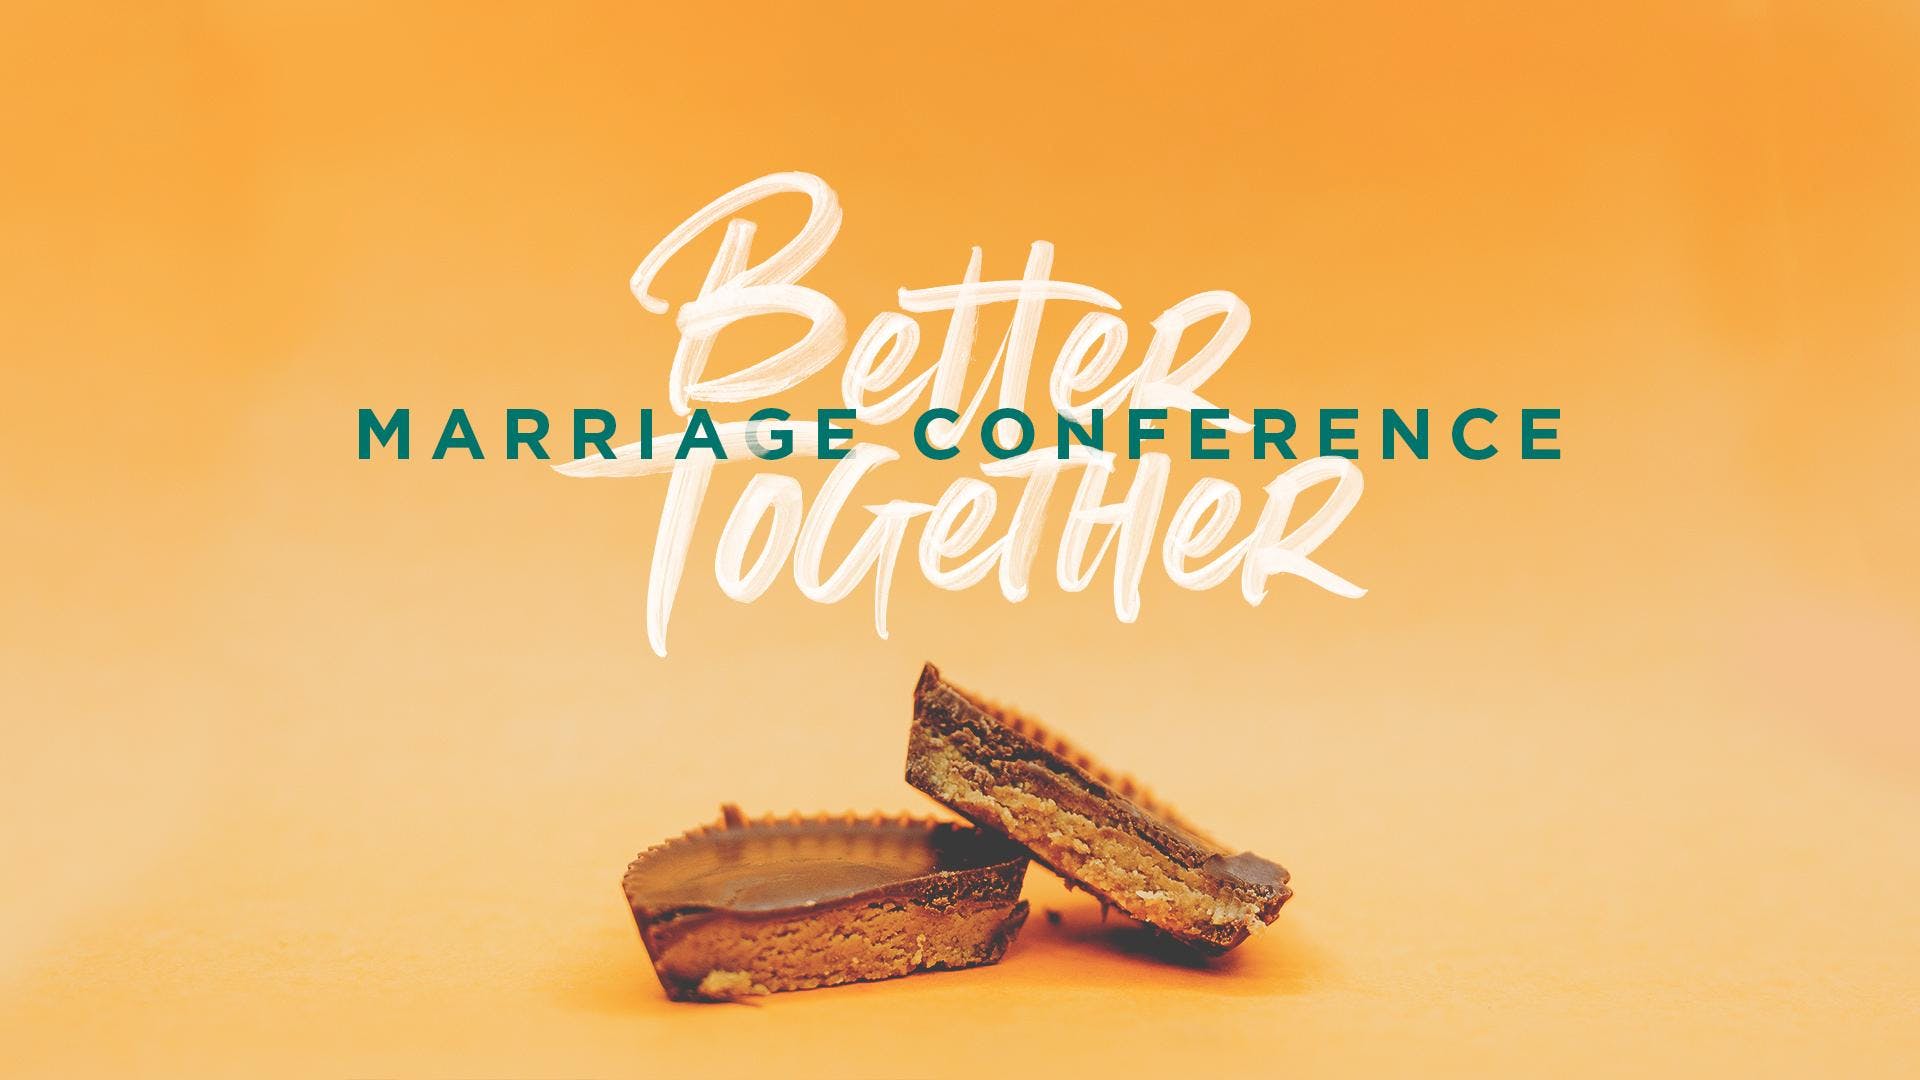 Marriage Conference: Better Together MAR 2019